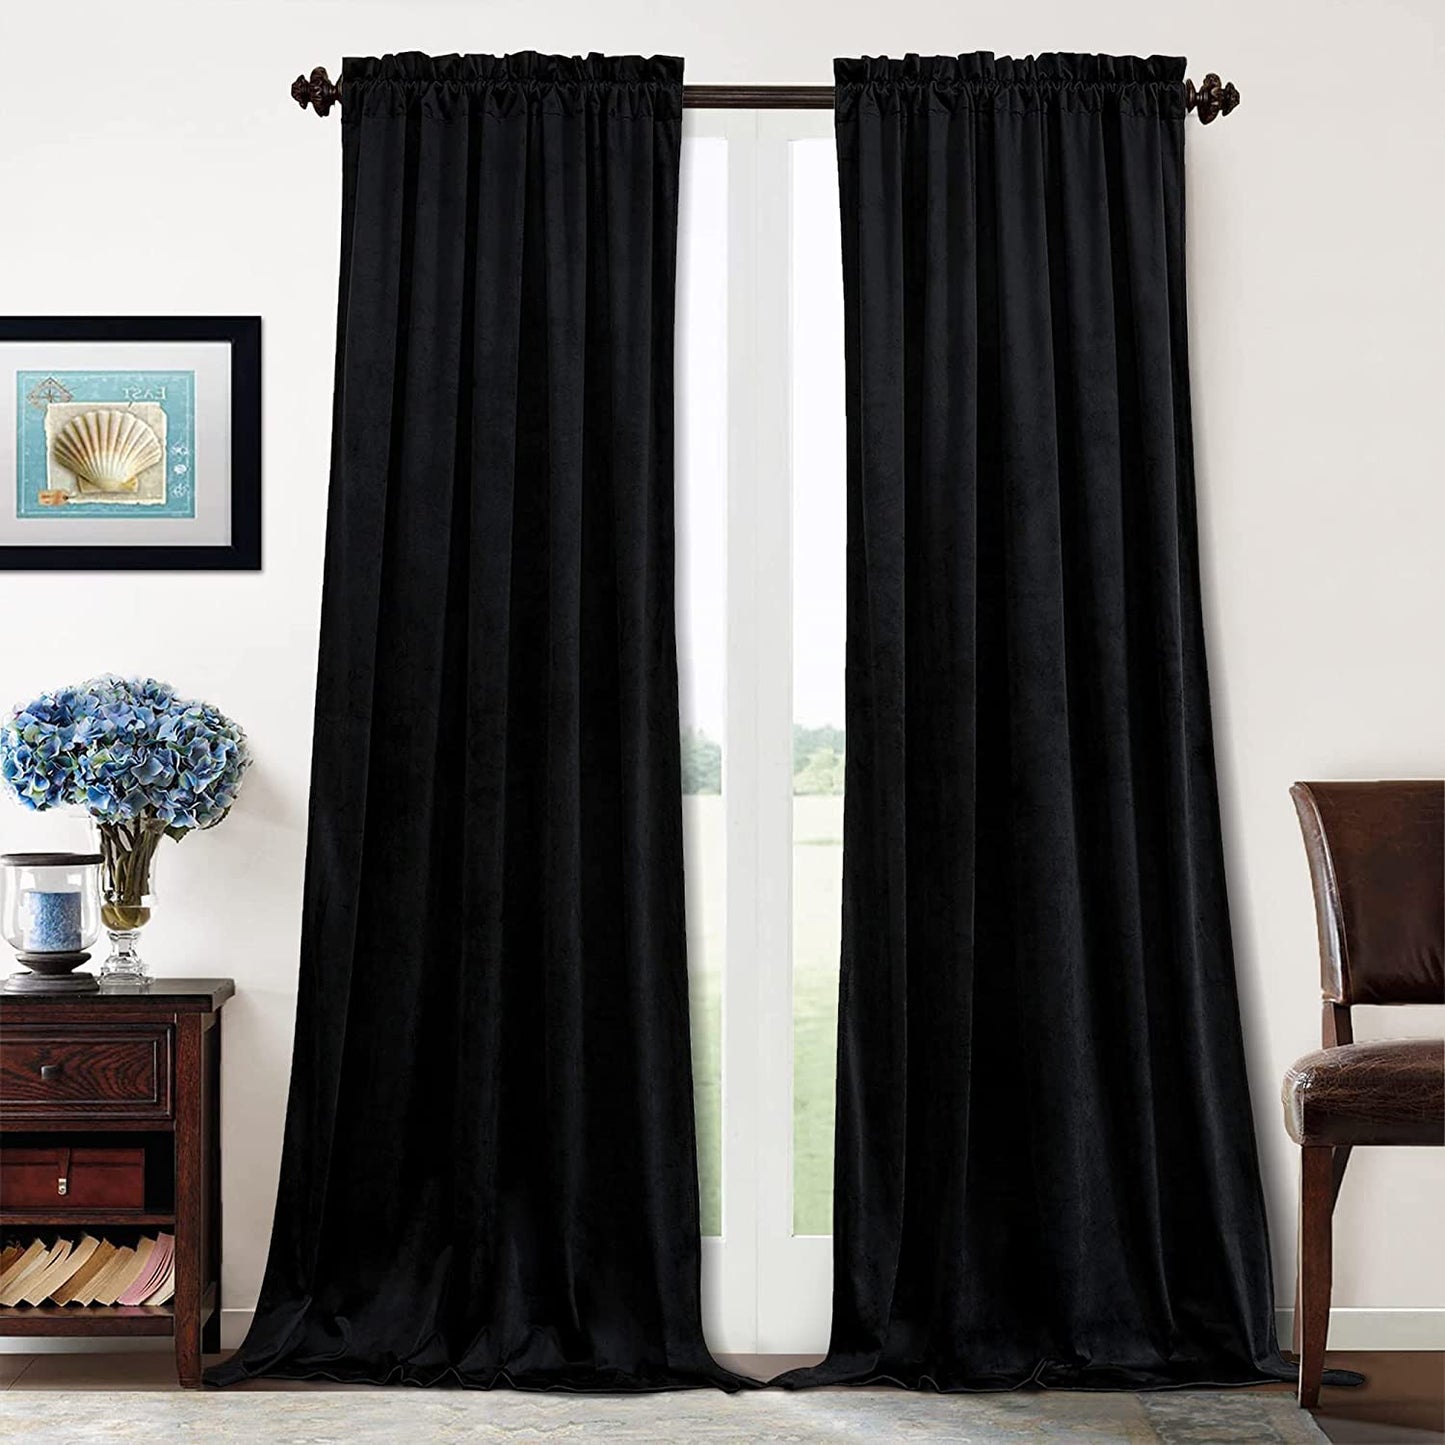 Benedeco Green Velvet Curtains for Bedroom Window, Super Soft Luxury Drapes, Room Darkening Thermal Insulated Rod Pocket Curtain for Living Room, W52 by L84 Inches, 2 Panels  Benedeco Black W52 * L84 | 2 Panels 